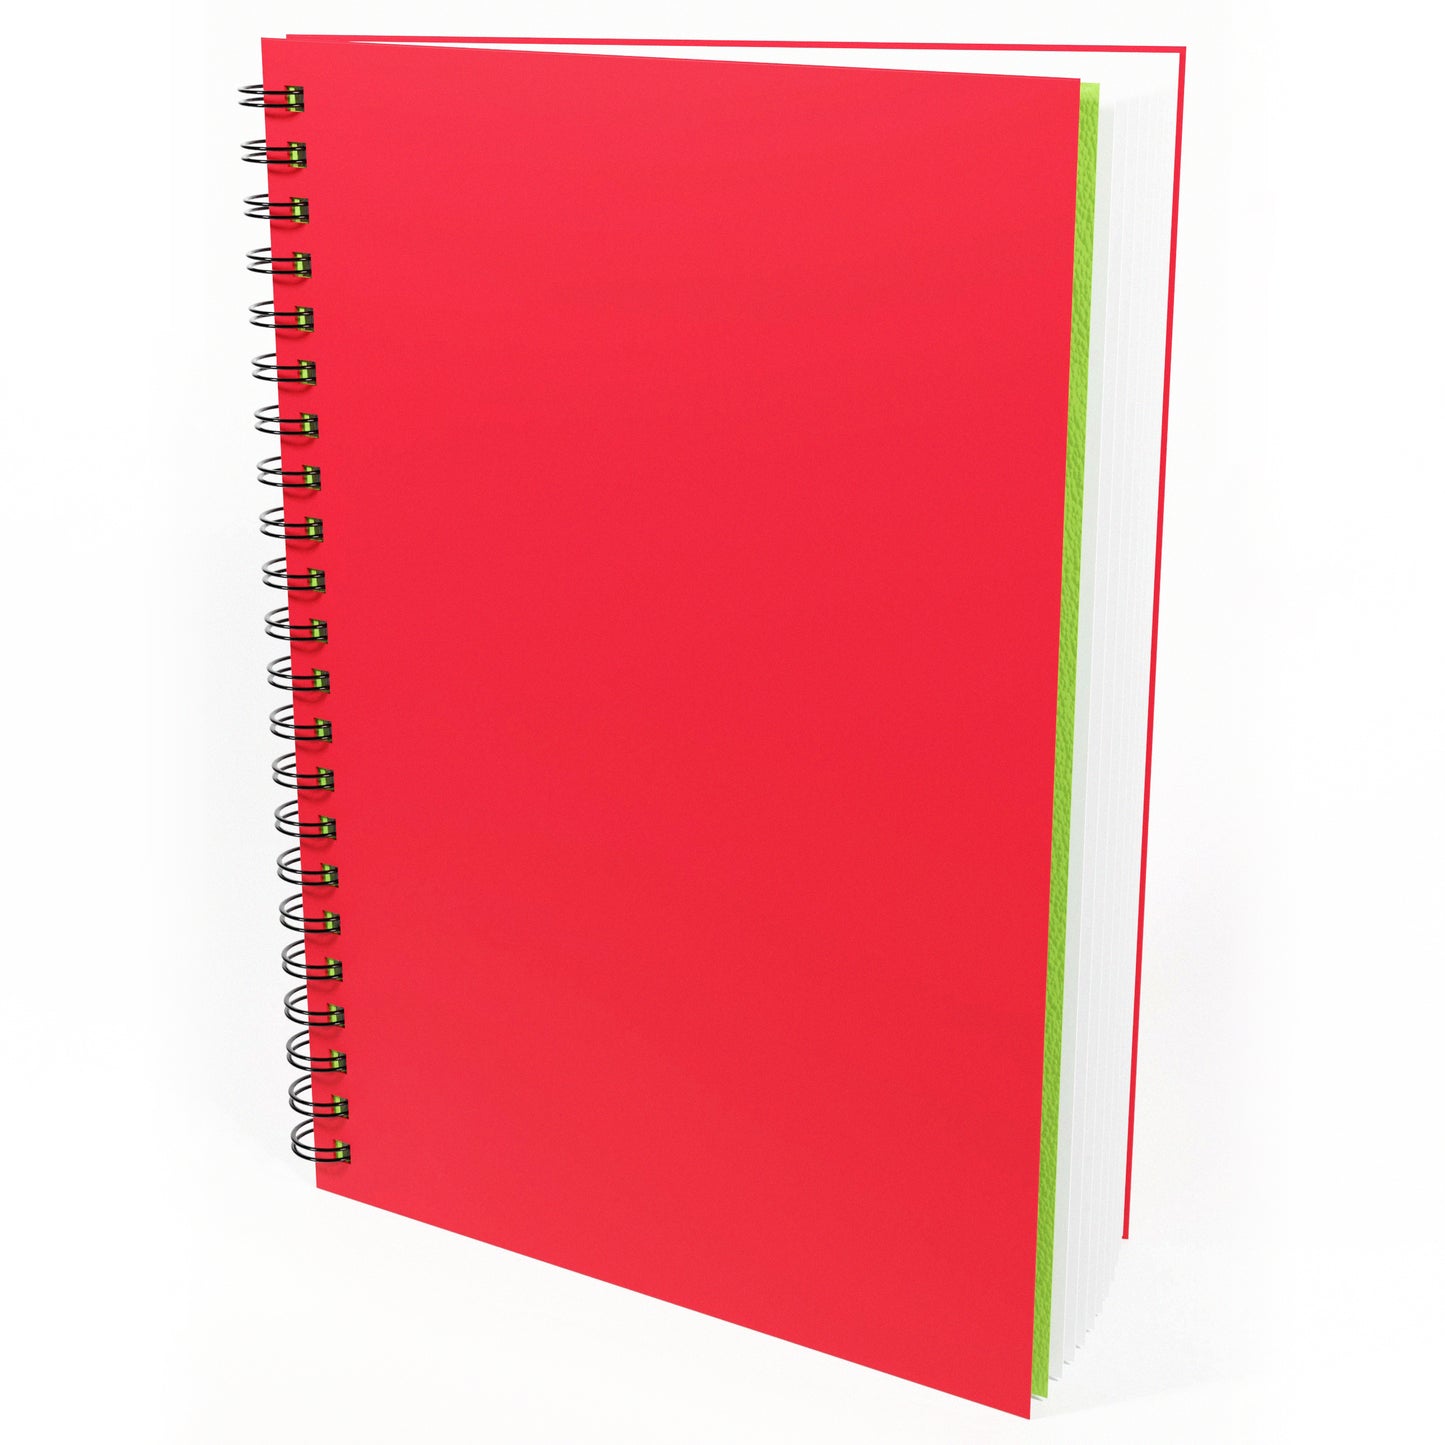 
                  
                    A4 portrait sketchbook with bright red cover.
                  
                